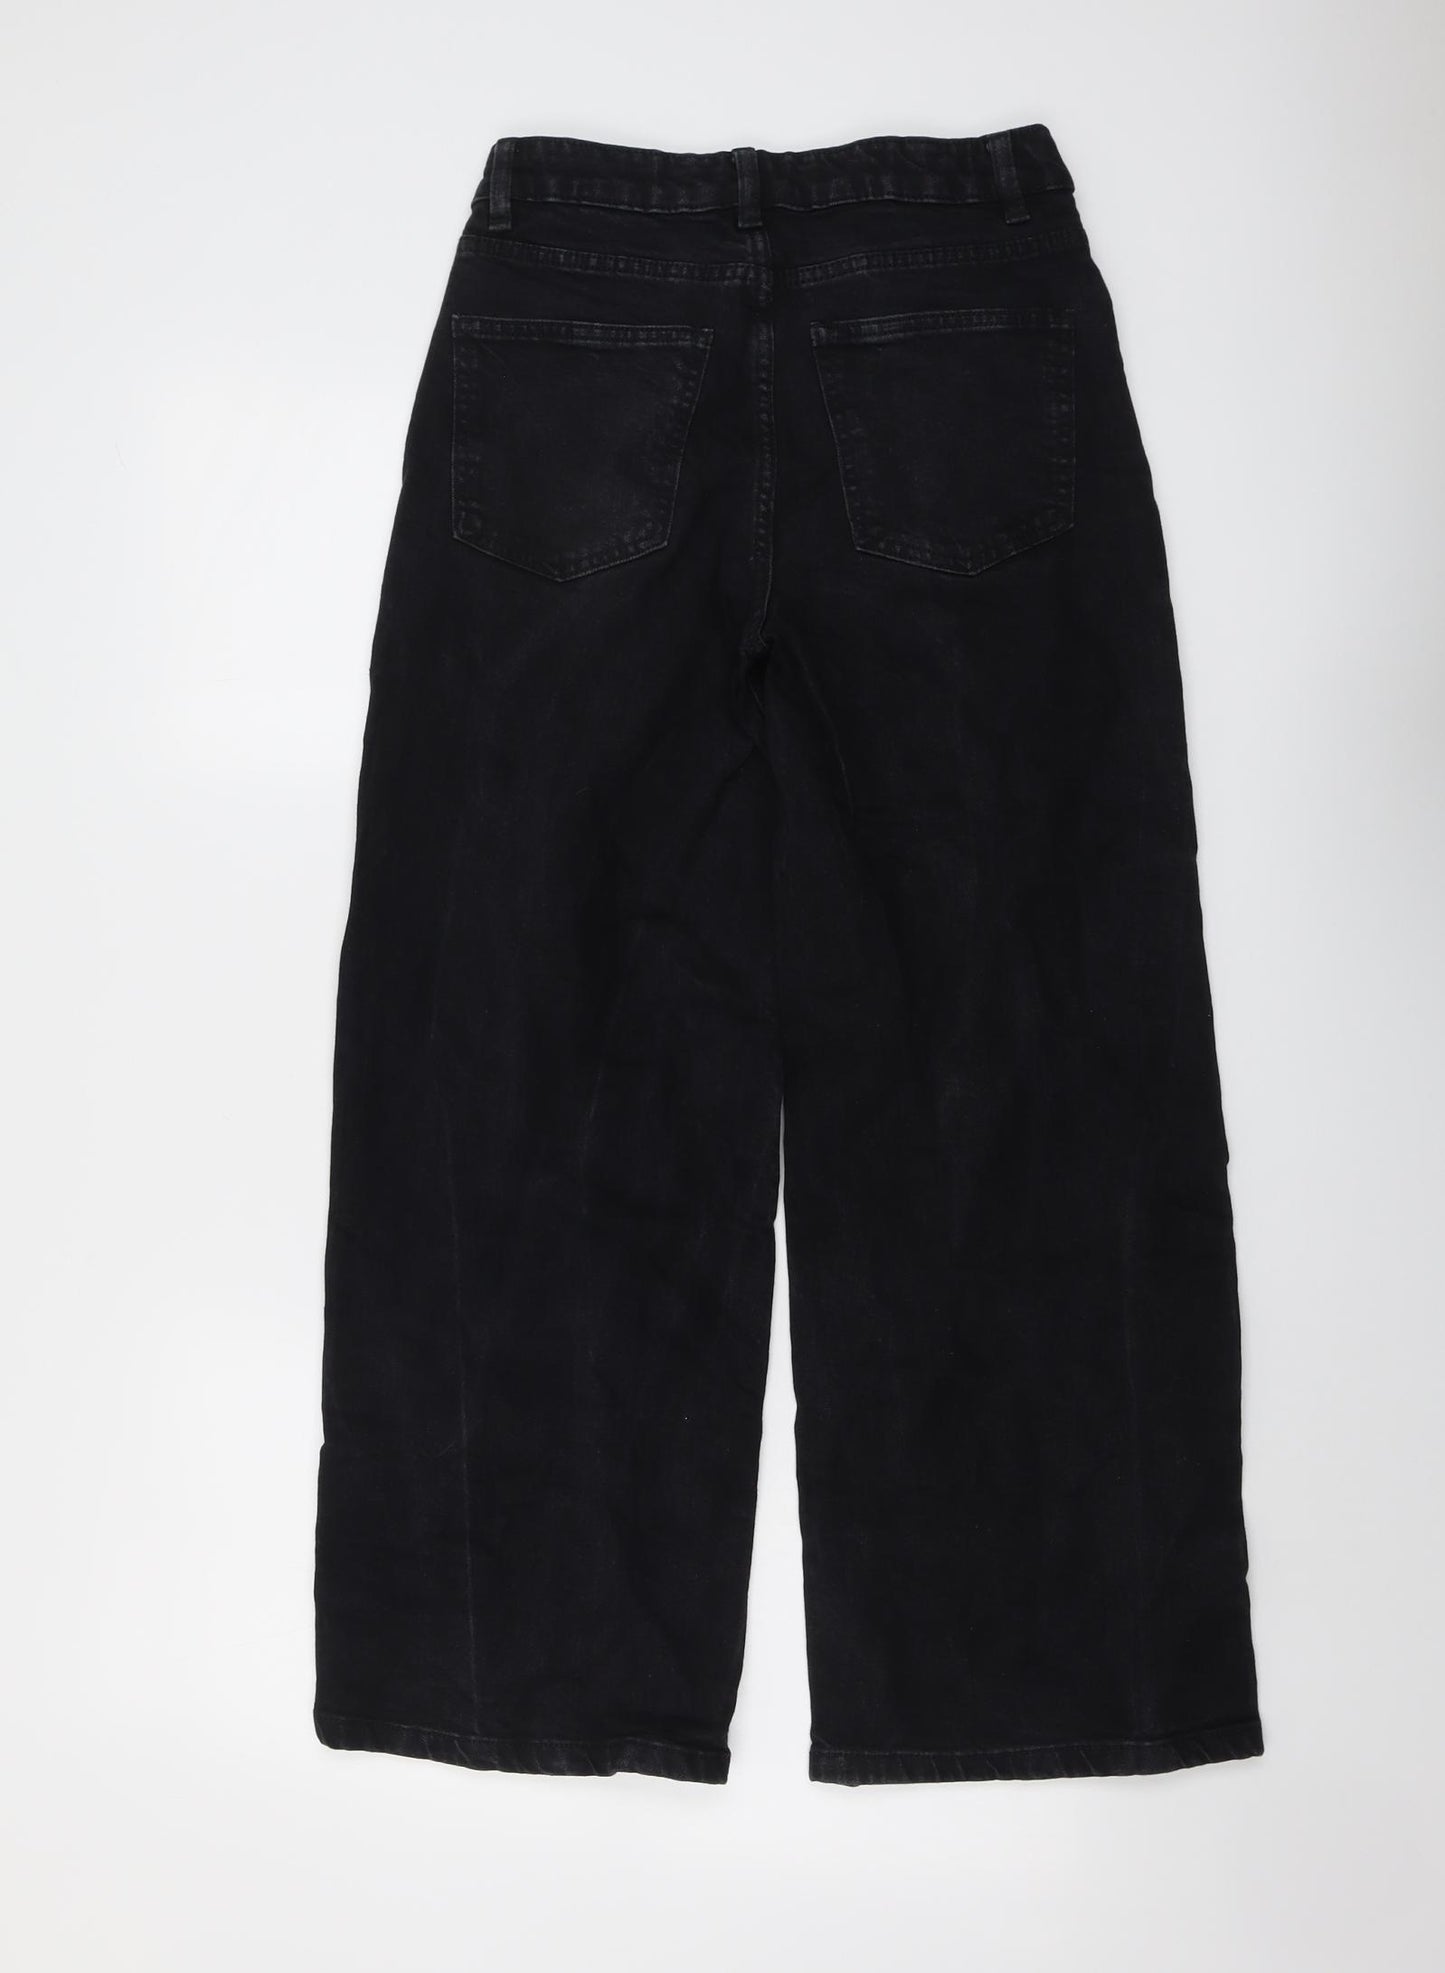 Marks and Spencer Womens Black Cotton Wide-Leg Jeans Size 8 L26 in Regular Button